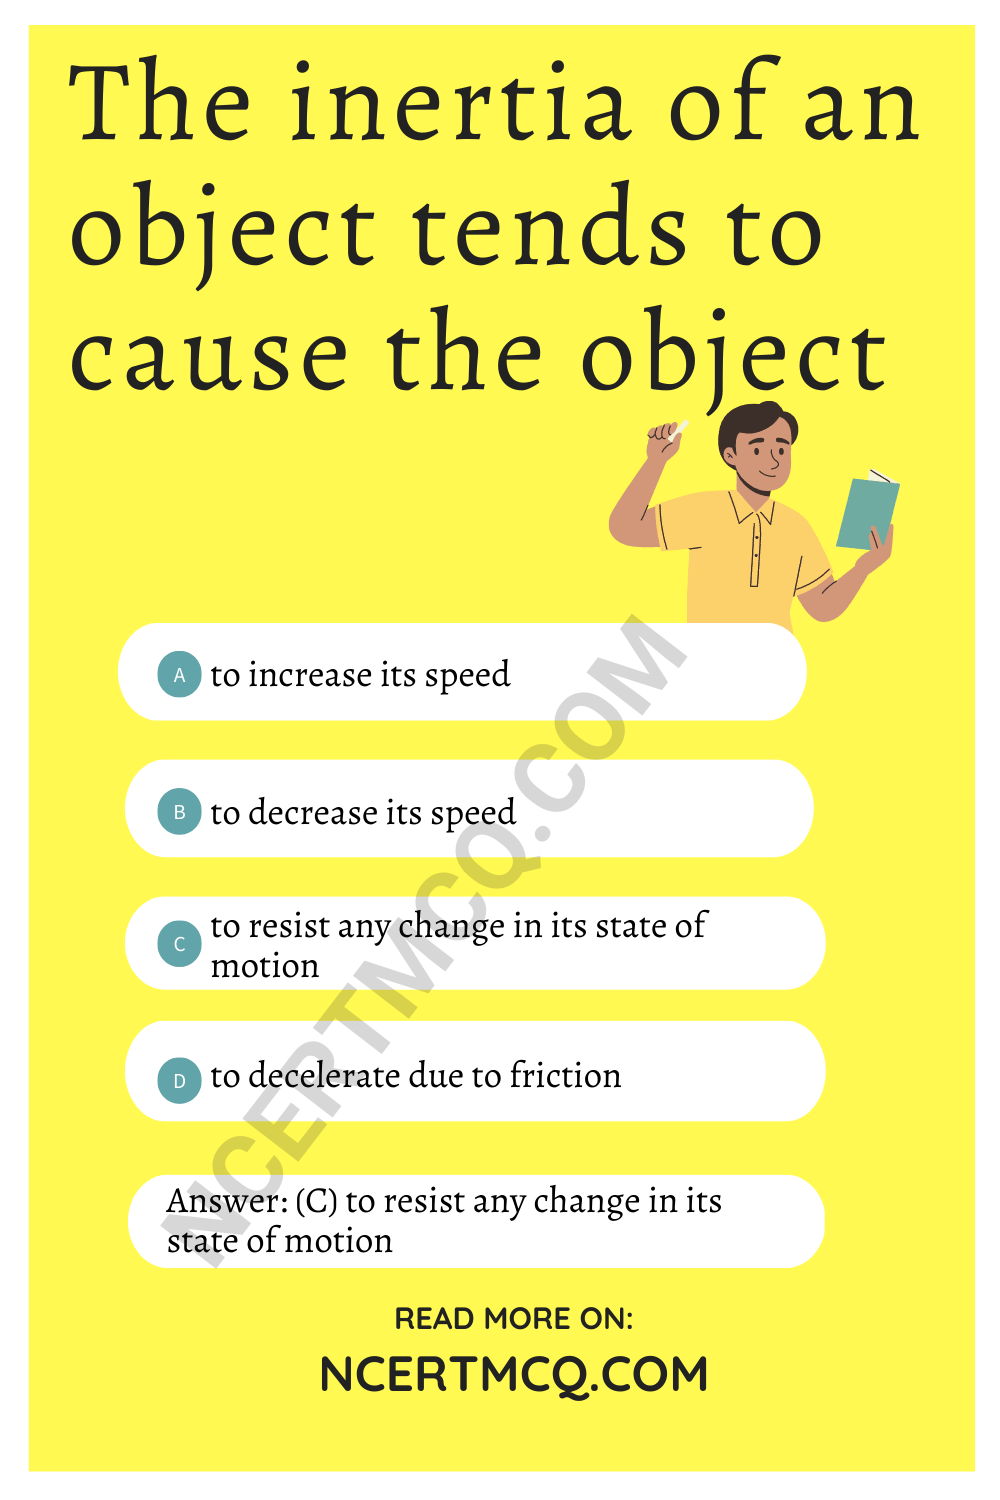 The inertia of an object tends to cause the object